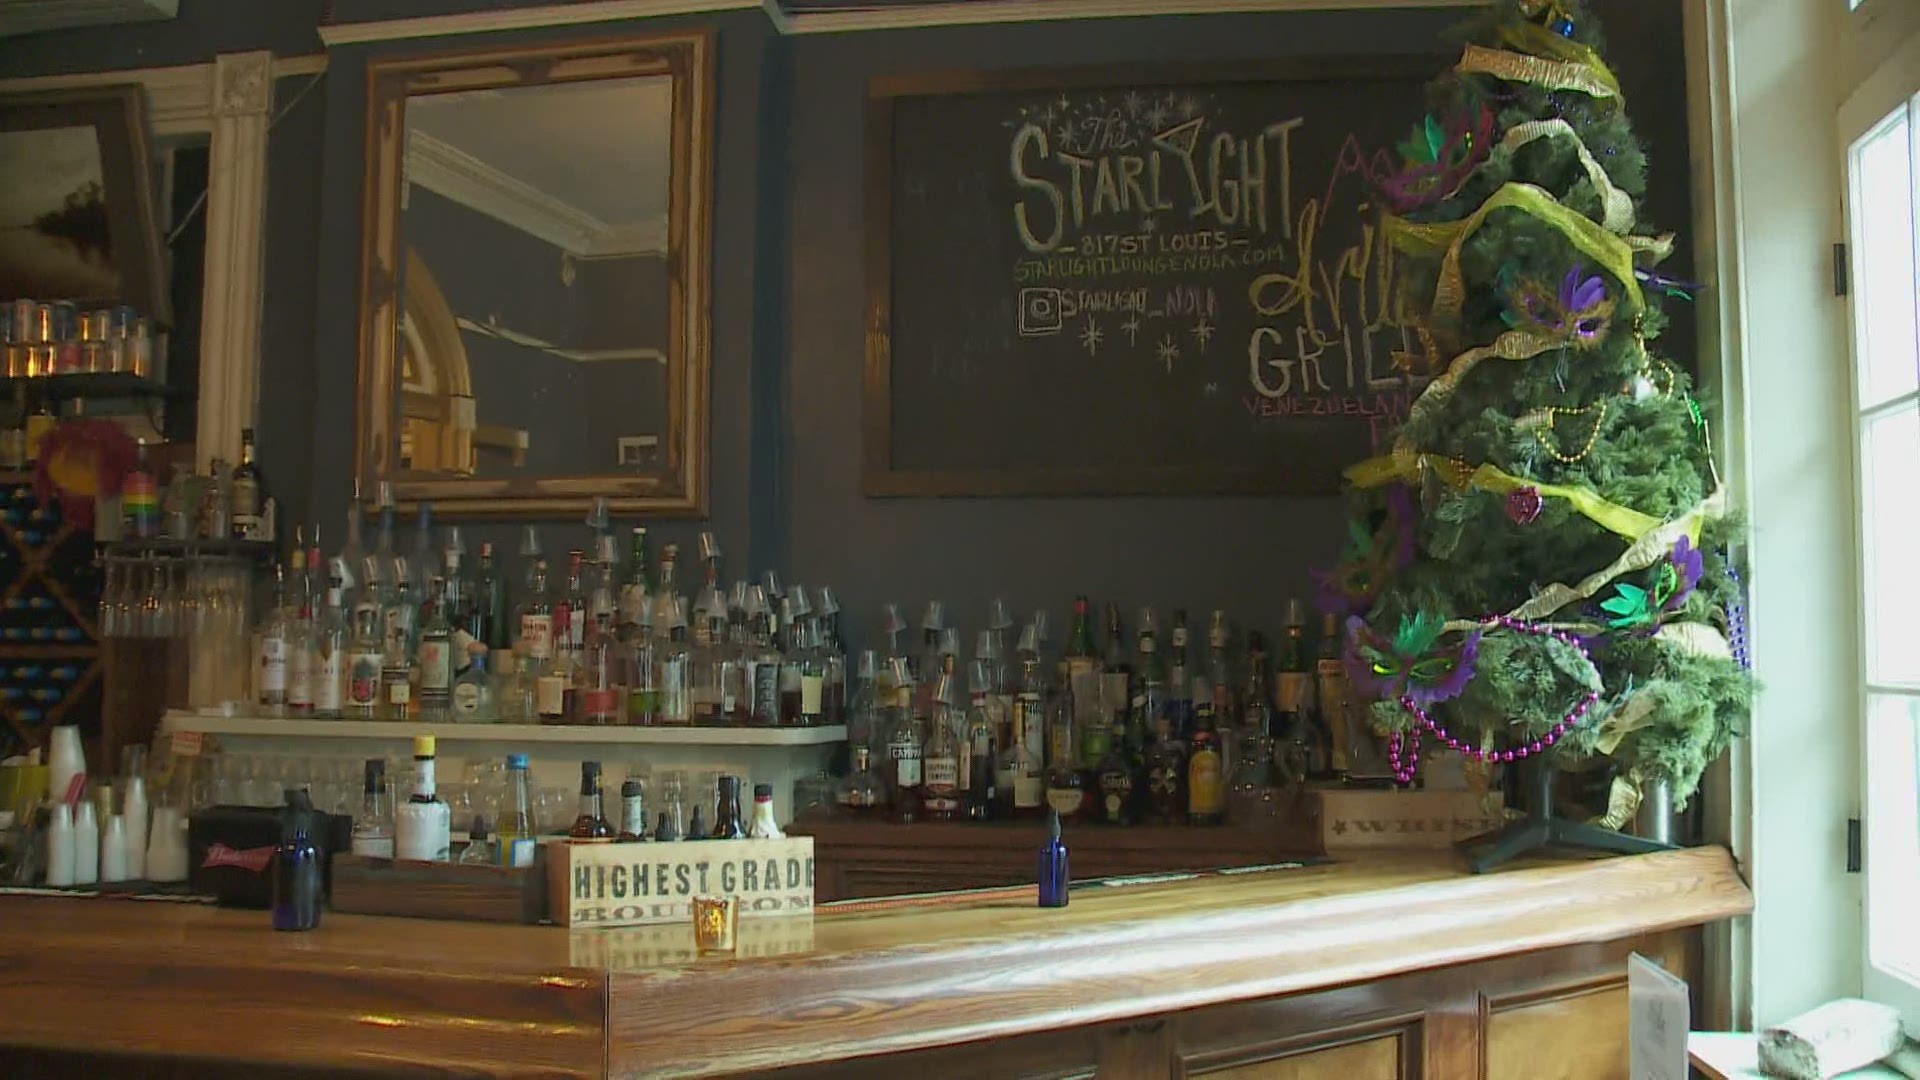 Mayor LaToya has decided to close all New Orleans bars during the mardi gras break to limit the crowds and if any business does not comply, they will face penalties.